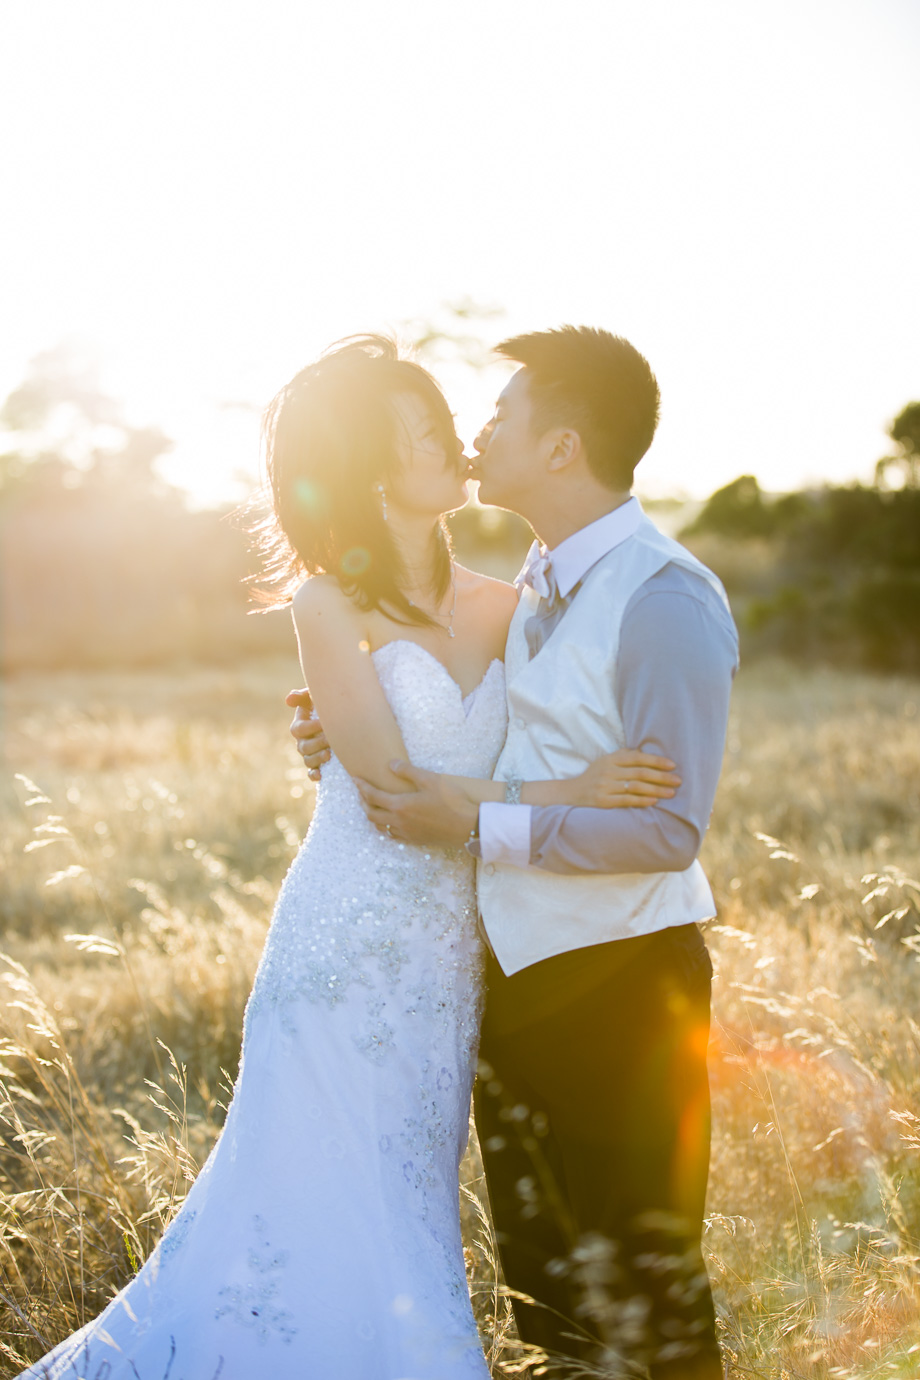 soft romantic portrait of the couple kissing in a grassy field with warm sun flare shining on them